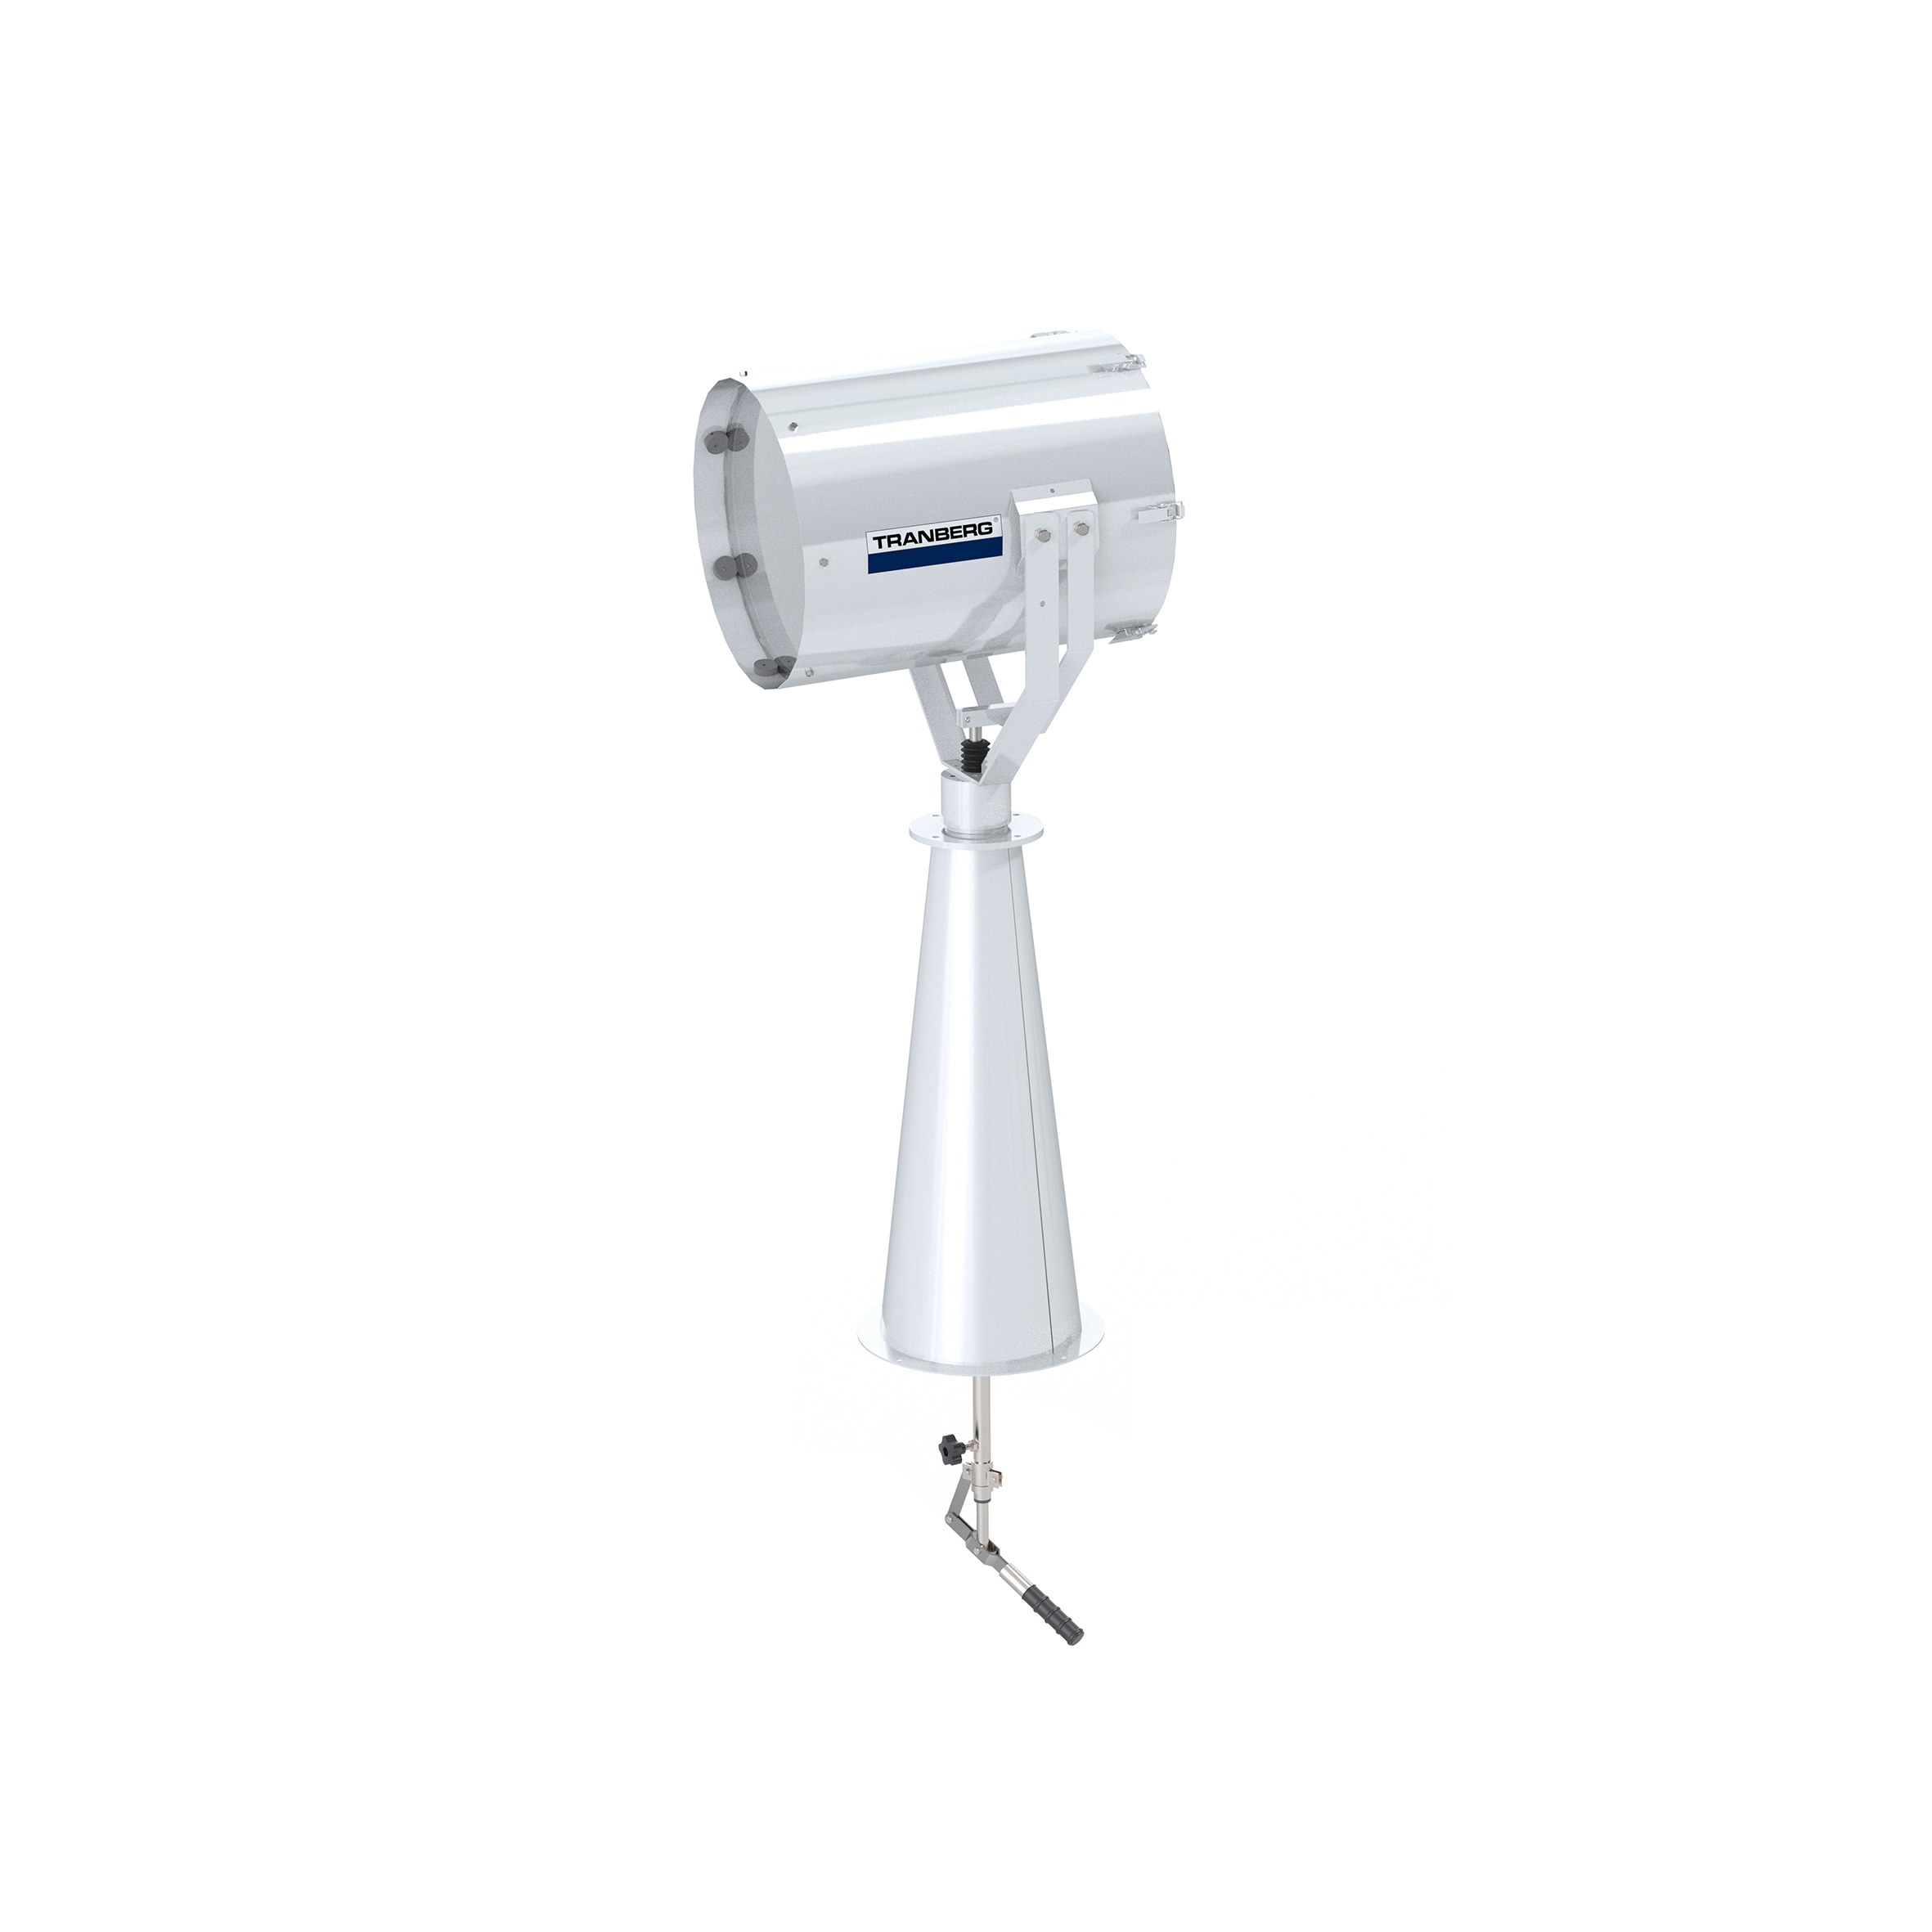 TEF 2630 Searchlight: Halogen 250W bulb incl, 24V, Bridge Controlled, Stainless Steel, W/800 mm pede